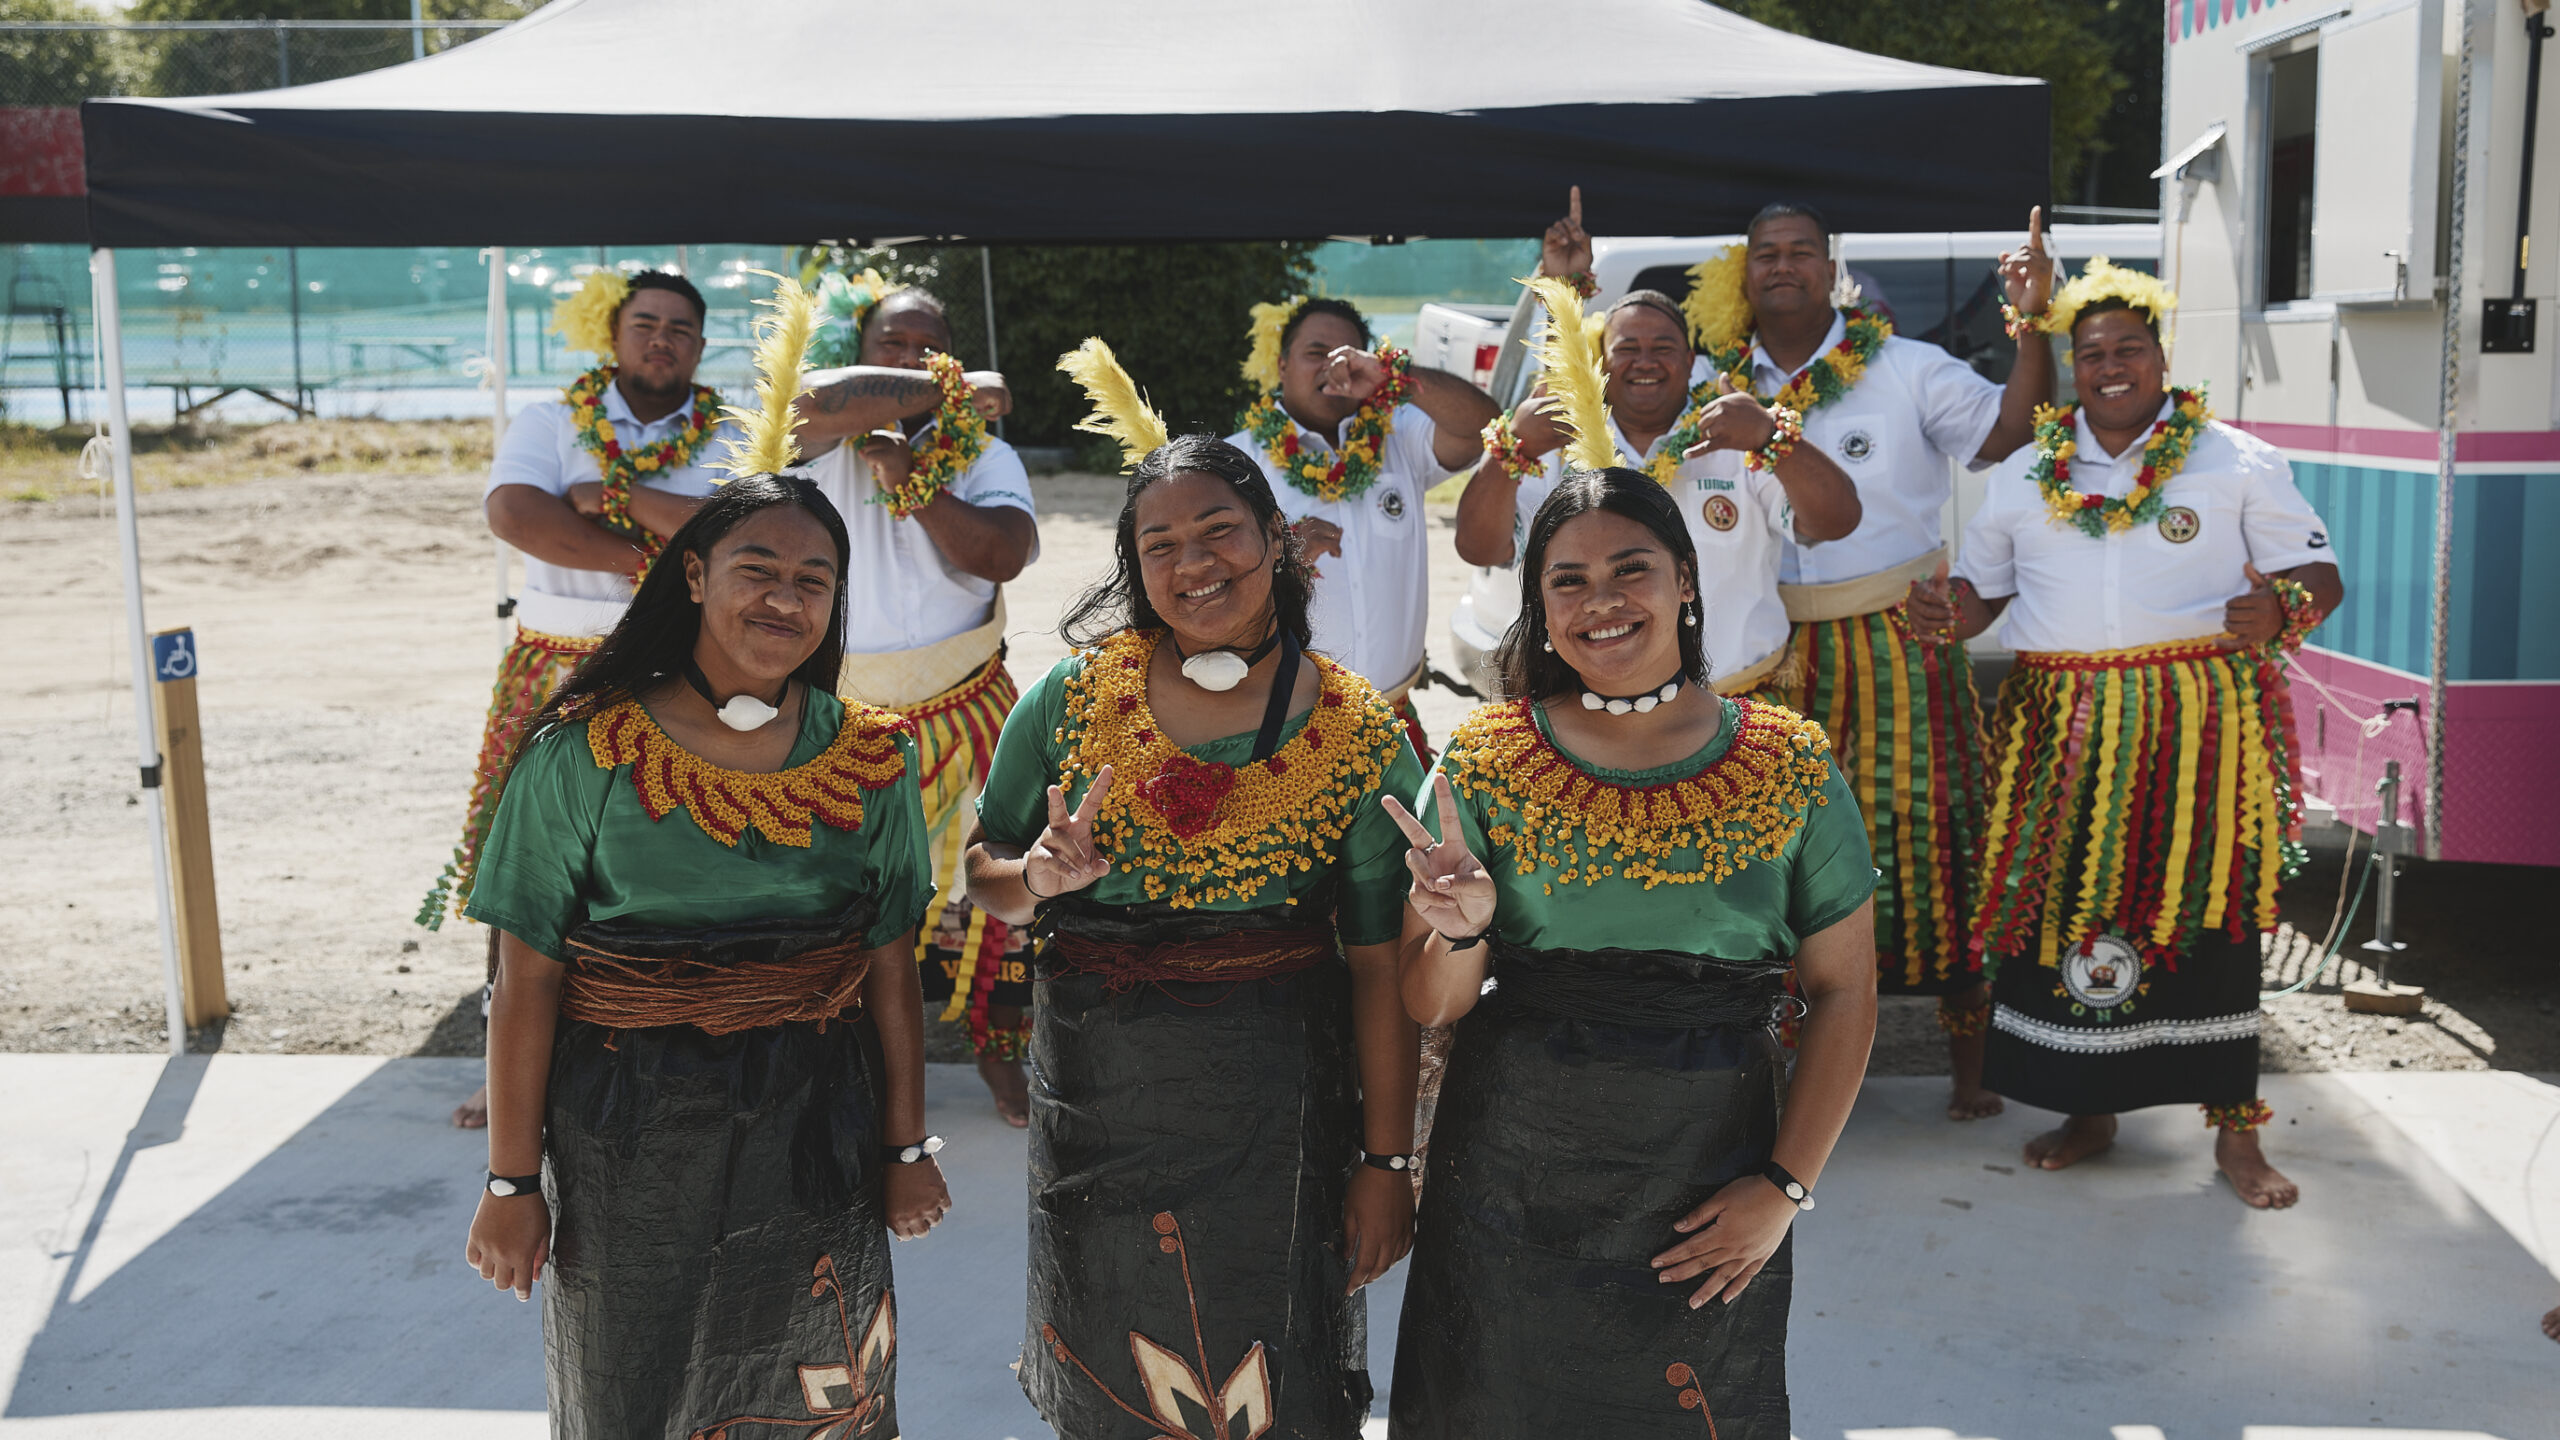 Pasifika performers smiling and posing in costume